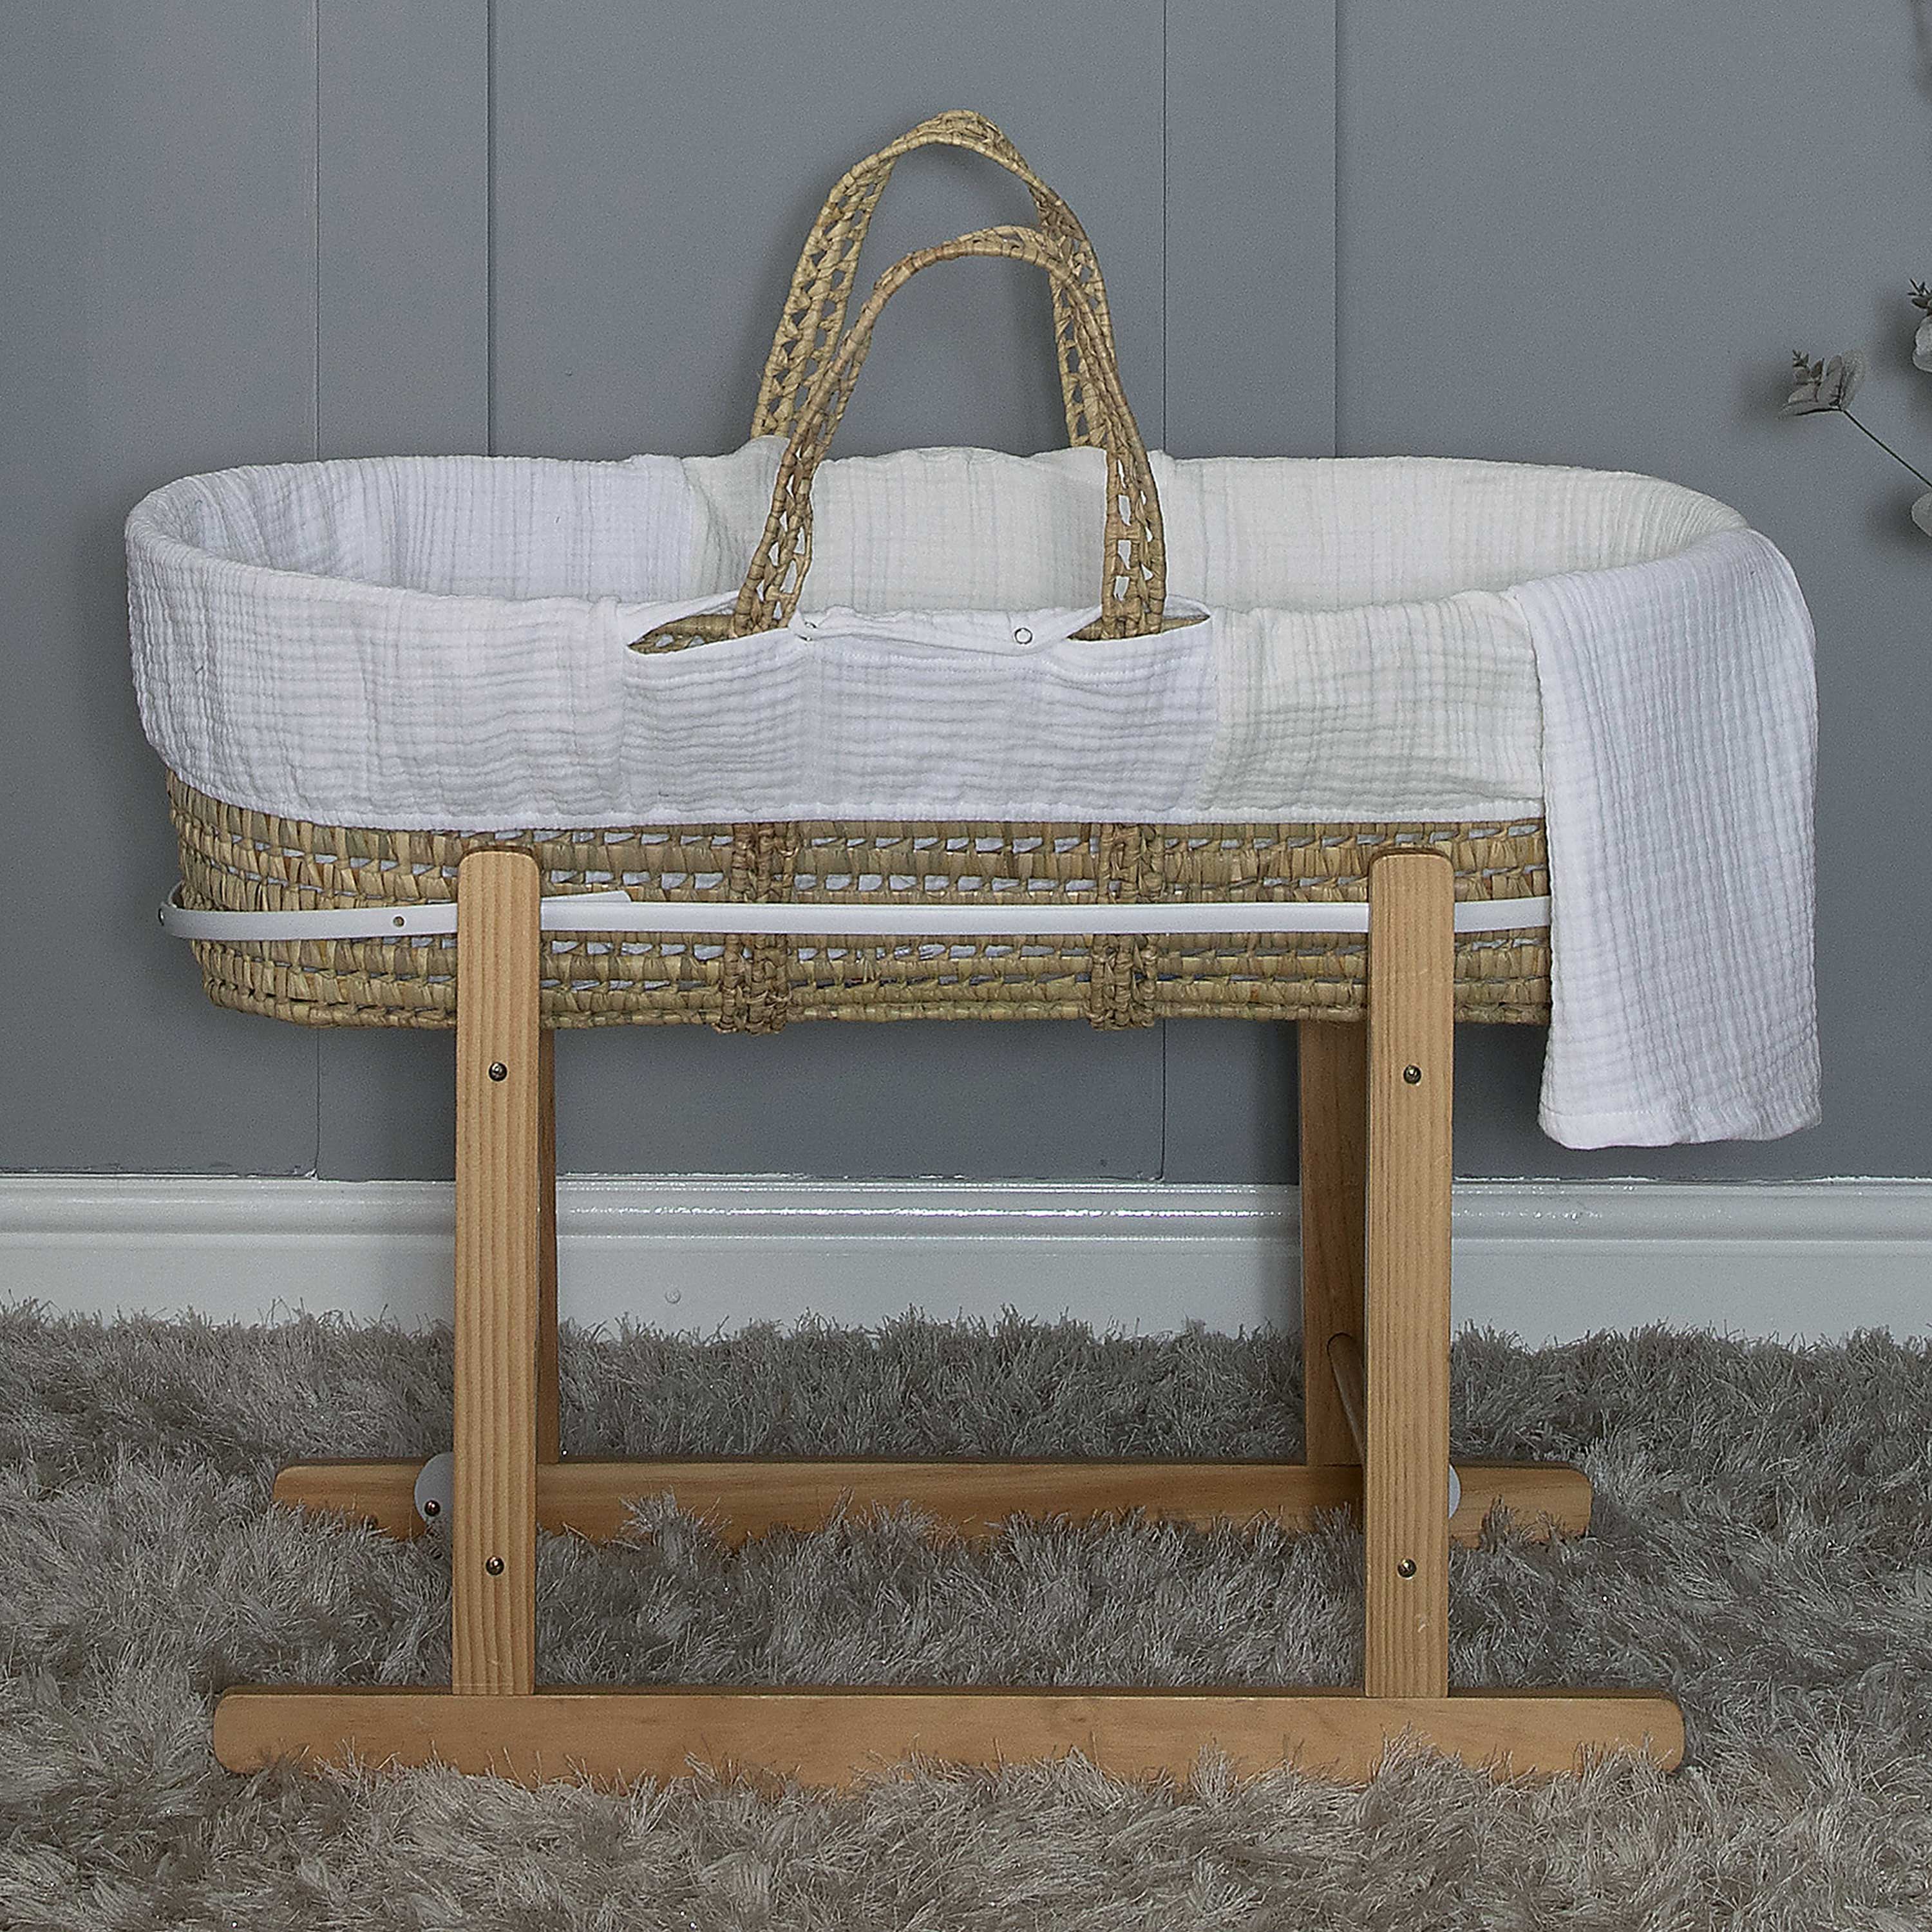 Amelia Jean Designs Palm Moses Basket With Folding Stand- Pure White - For Your Little One